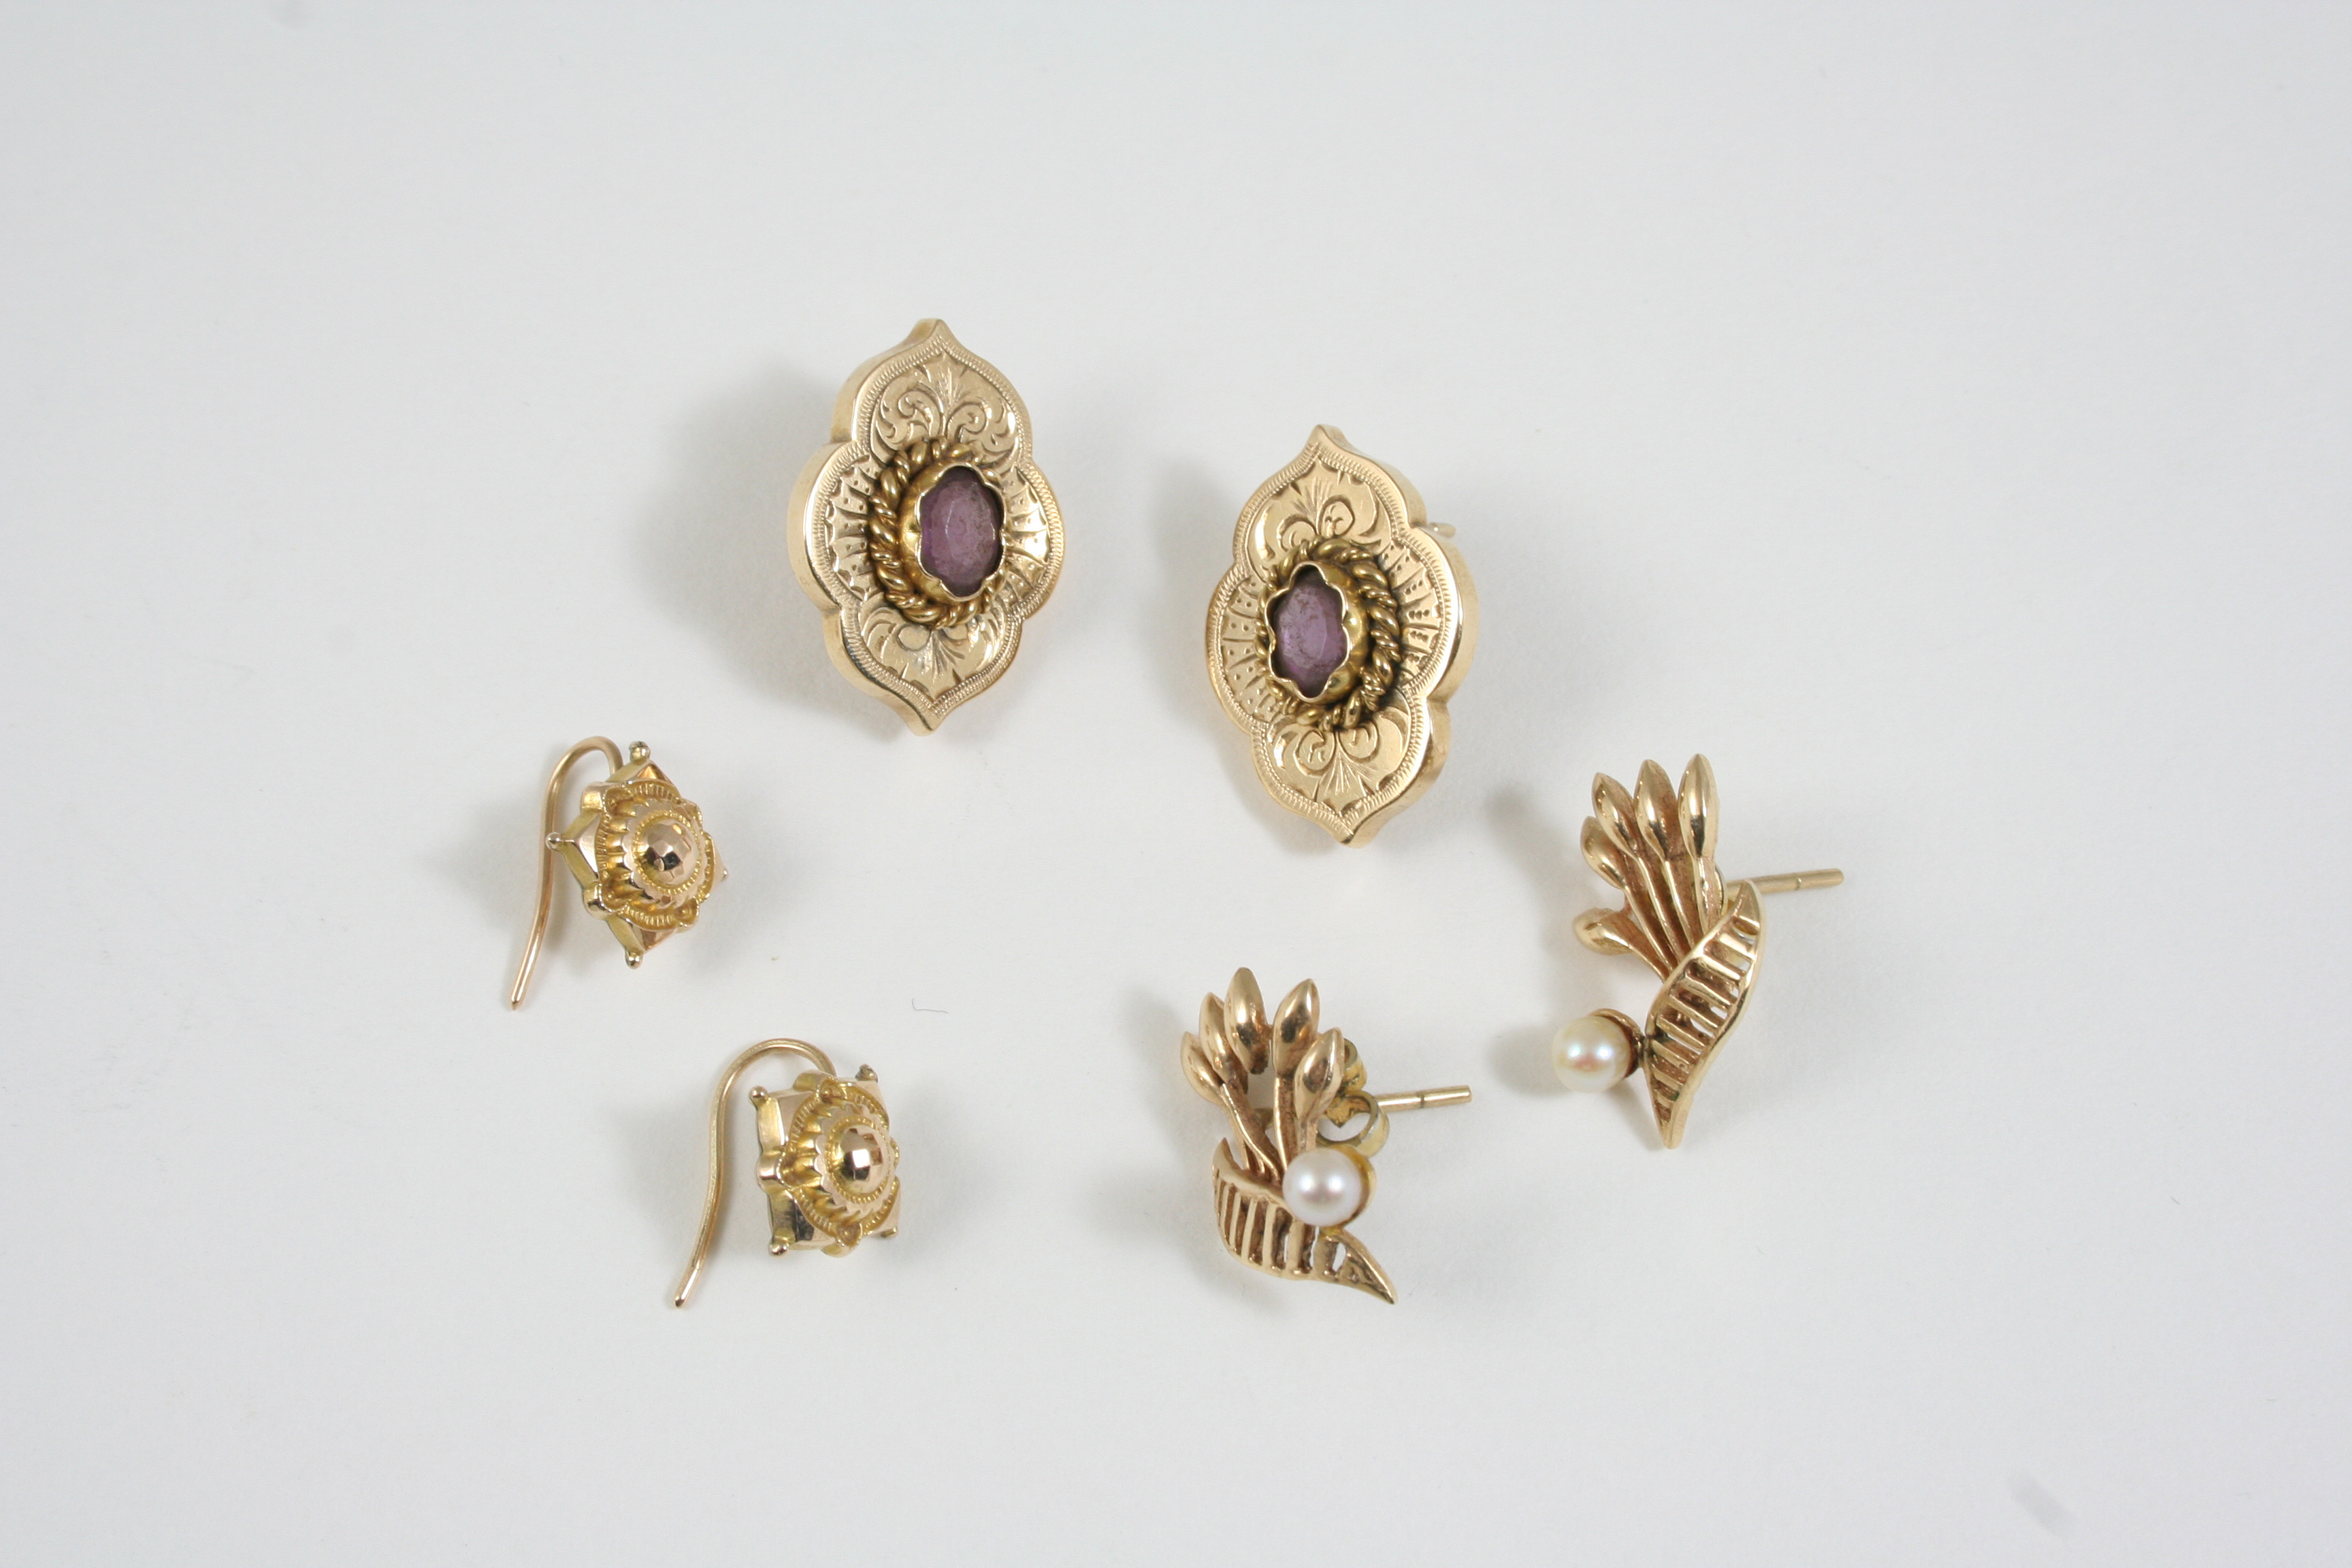 A PAIR OF AMETHYST AND GOLD EARRINGS each set with an oval-shaped amethyst, together with two